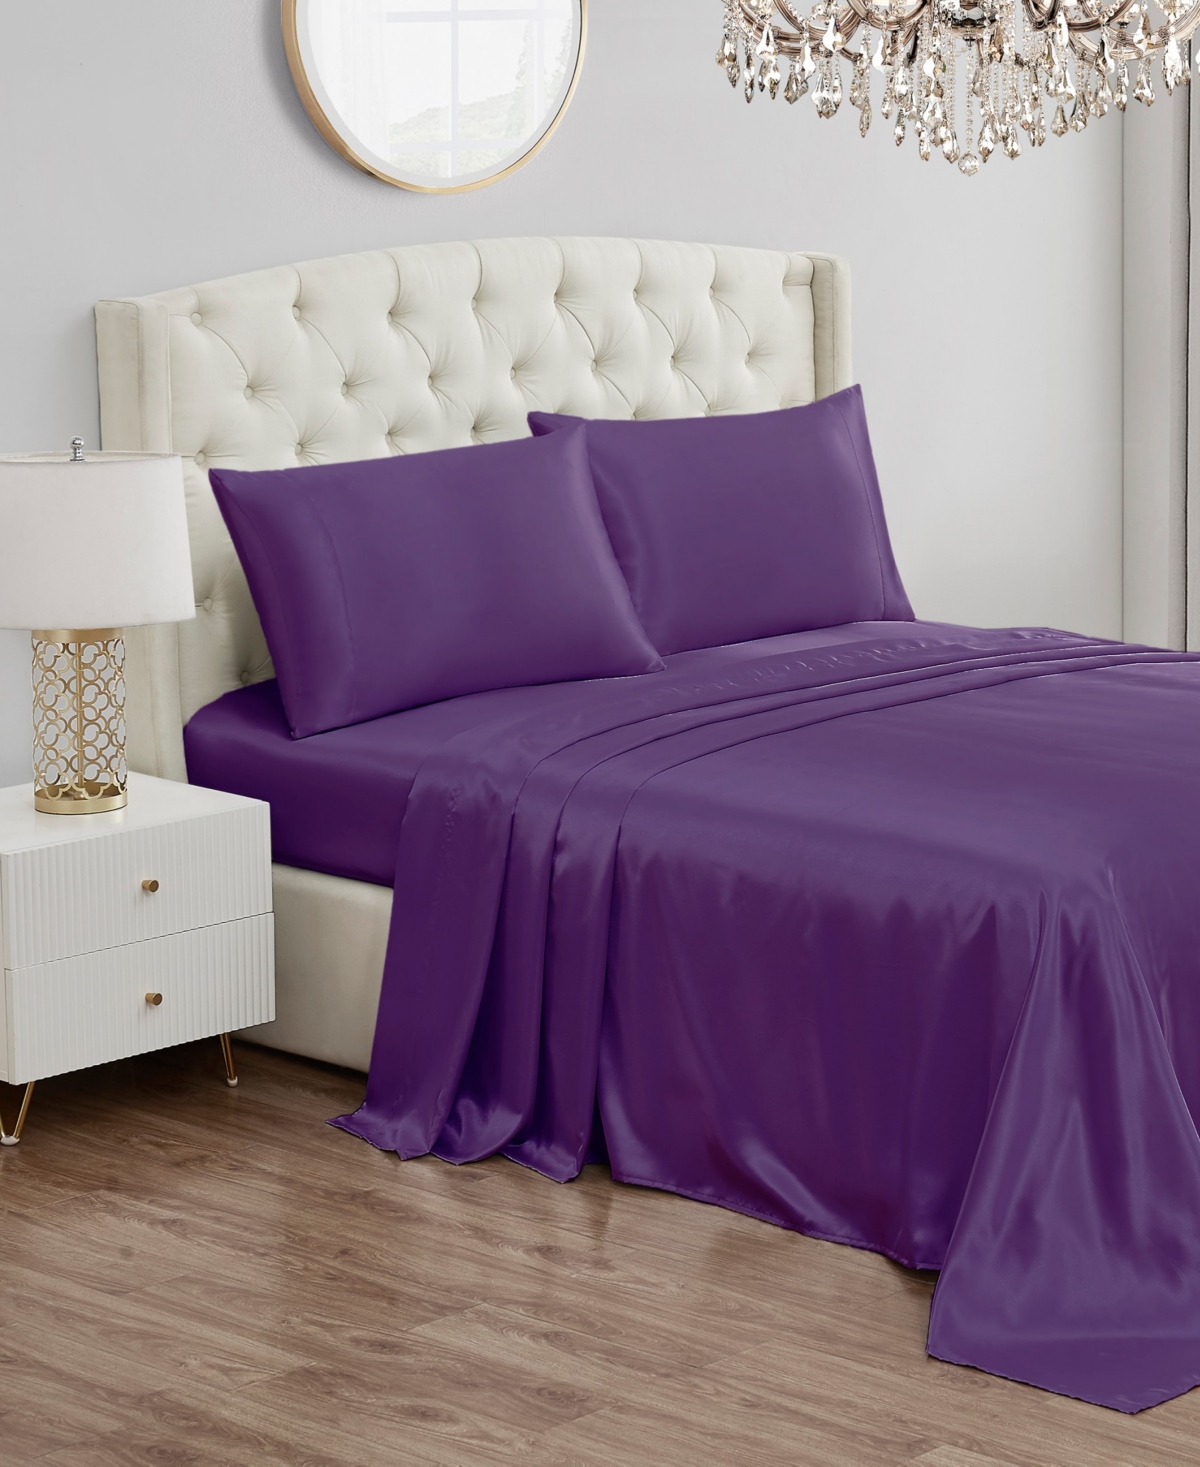 Juicy Couture Satin 4 Piece Sheet Set, King In Purple